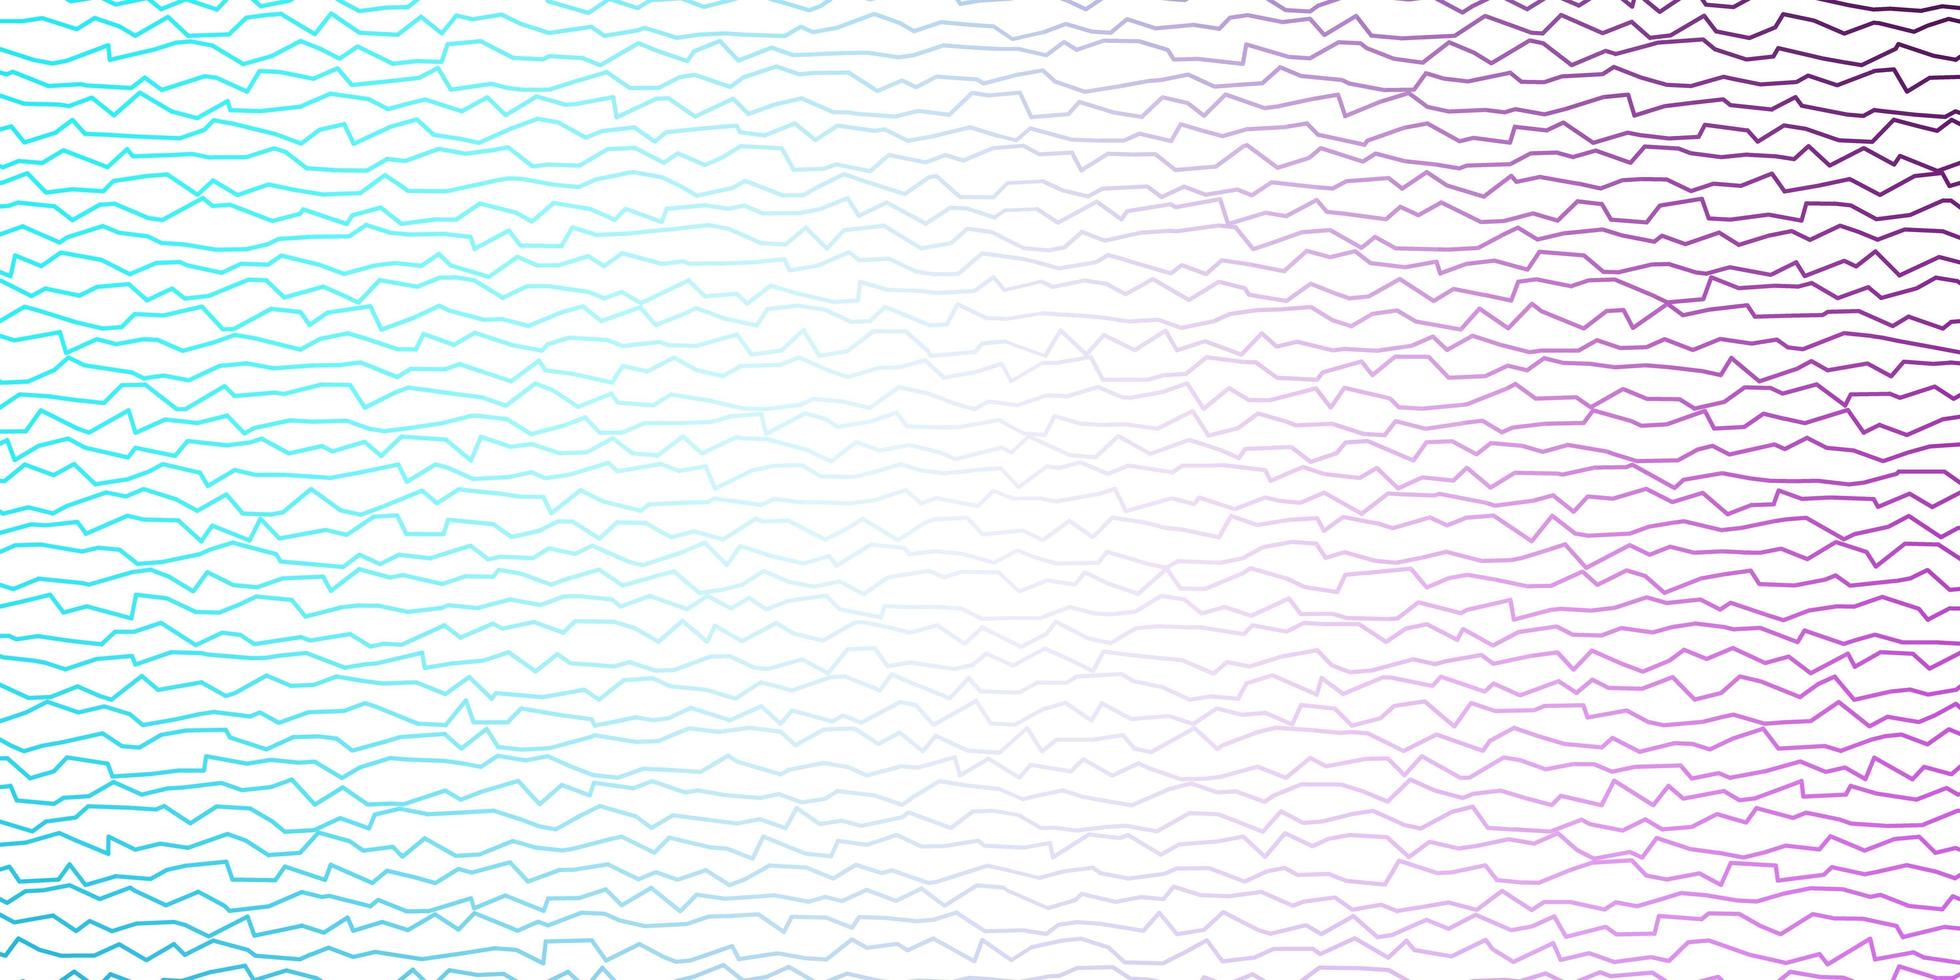 Purple and blue layout with wry lines. vector